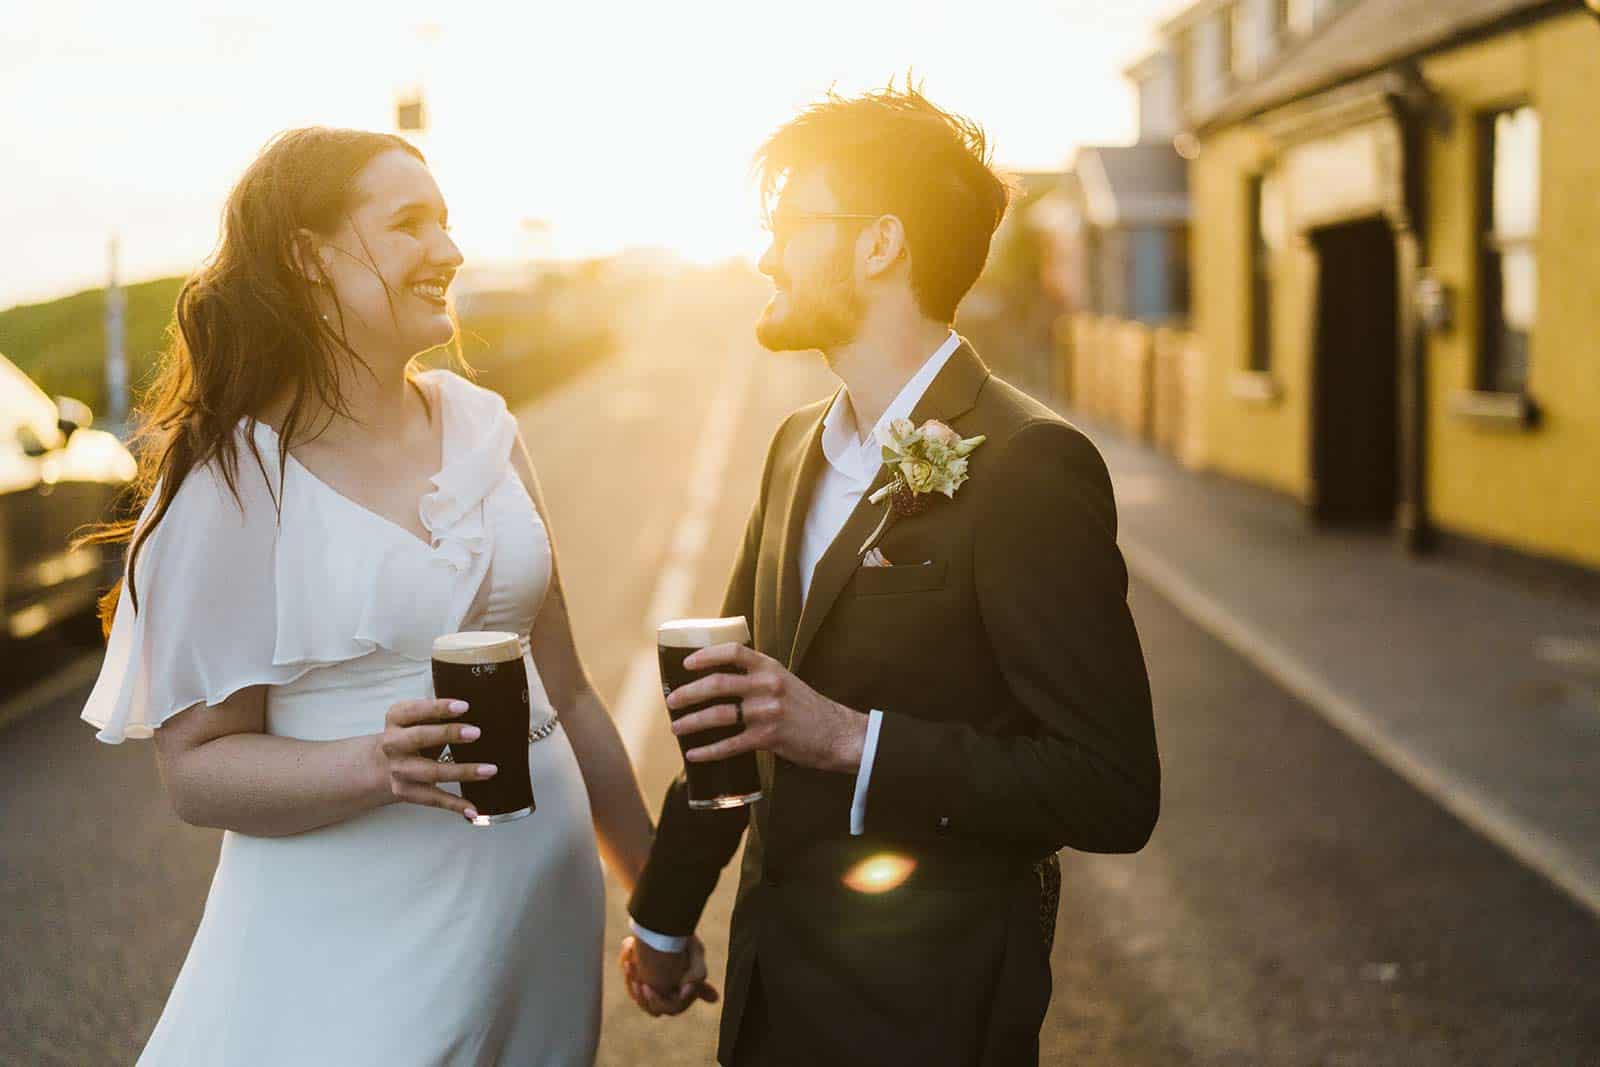 couples eloping in Ireland in sunset hours light